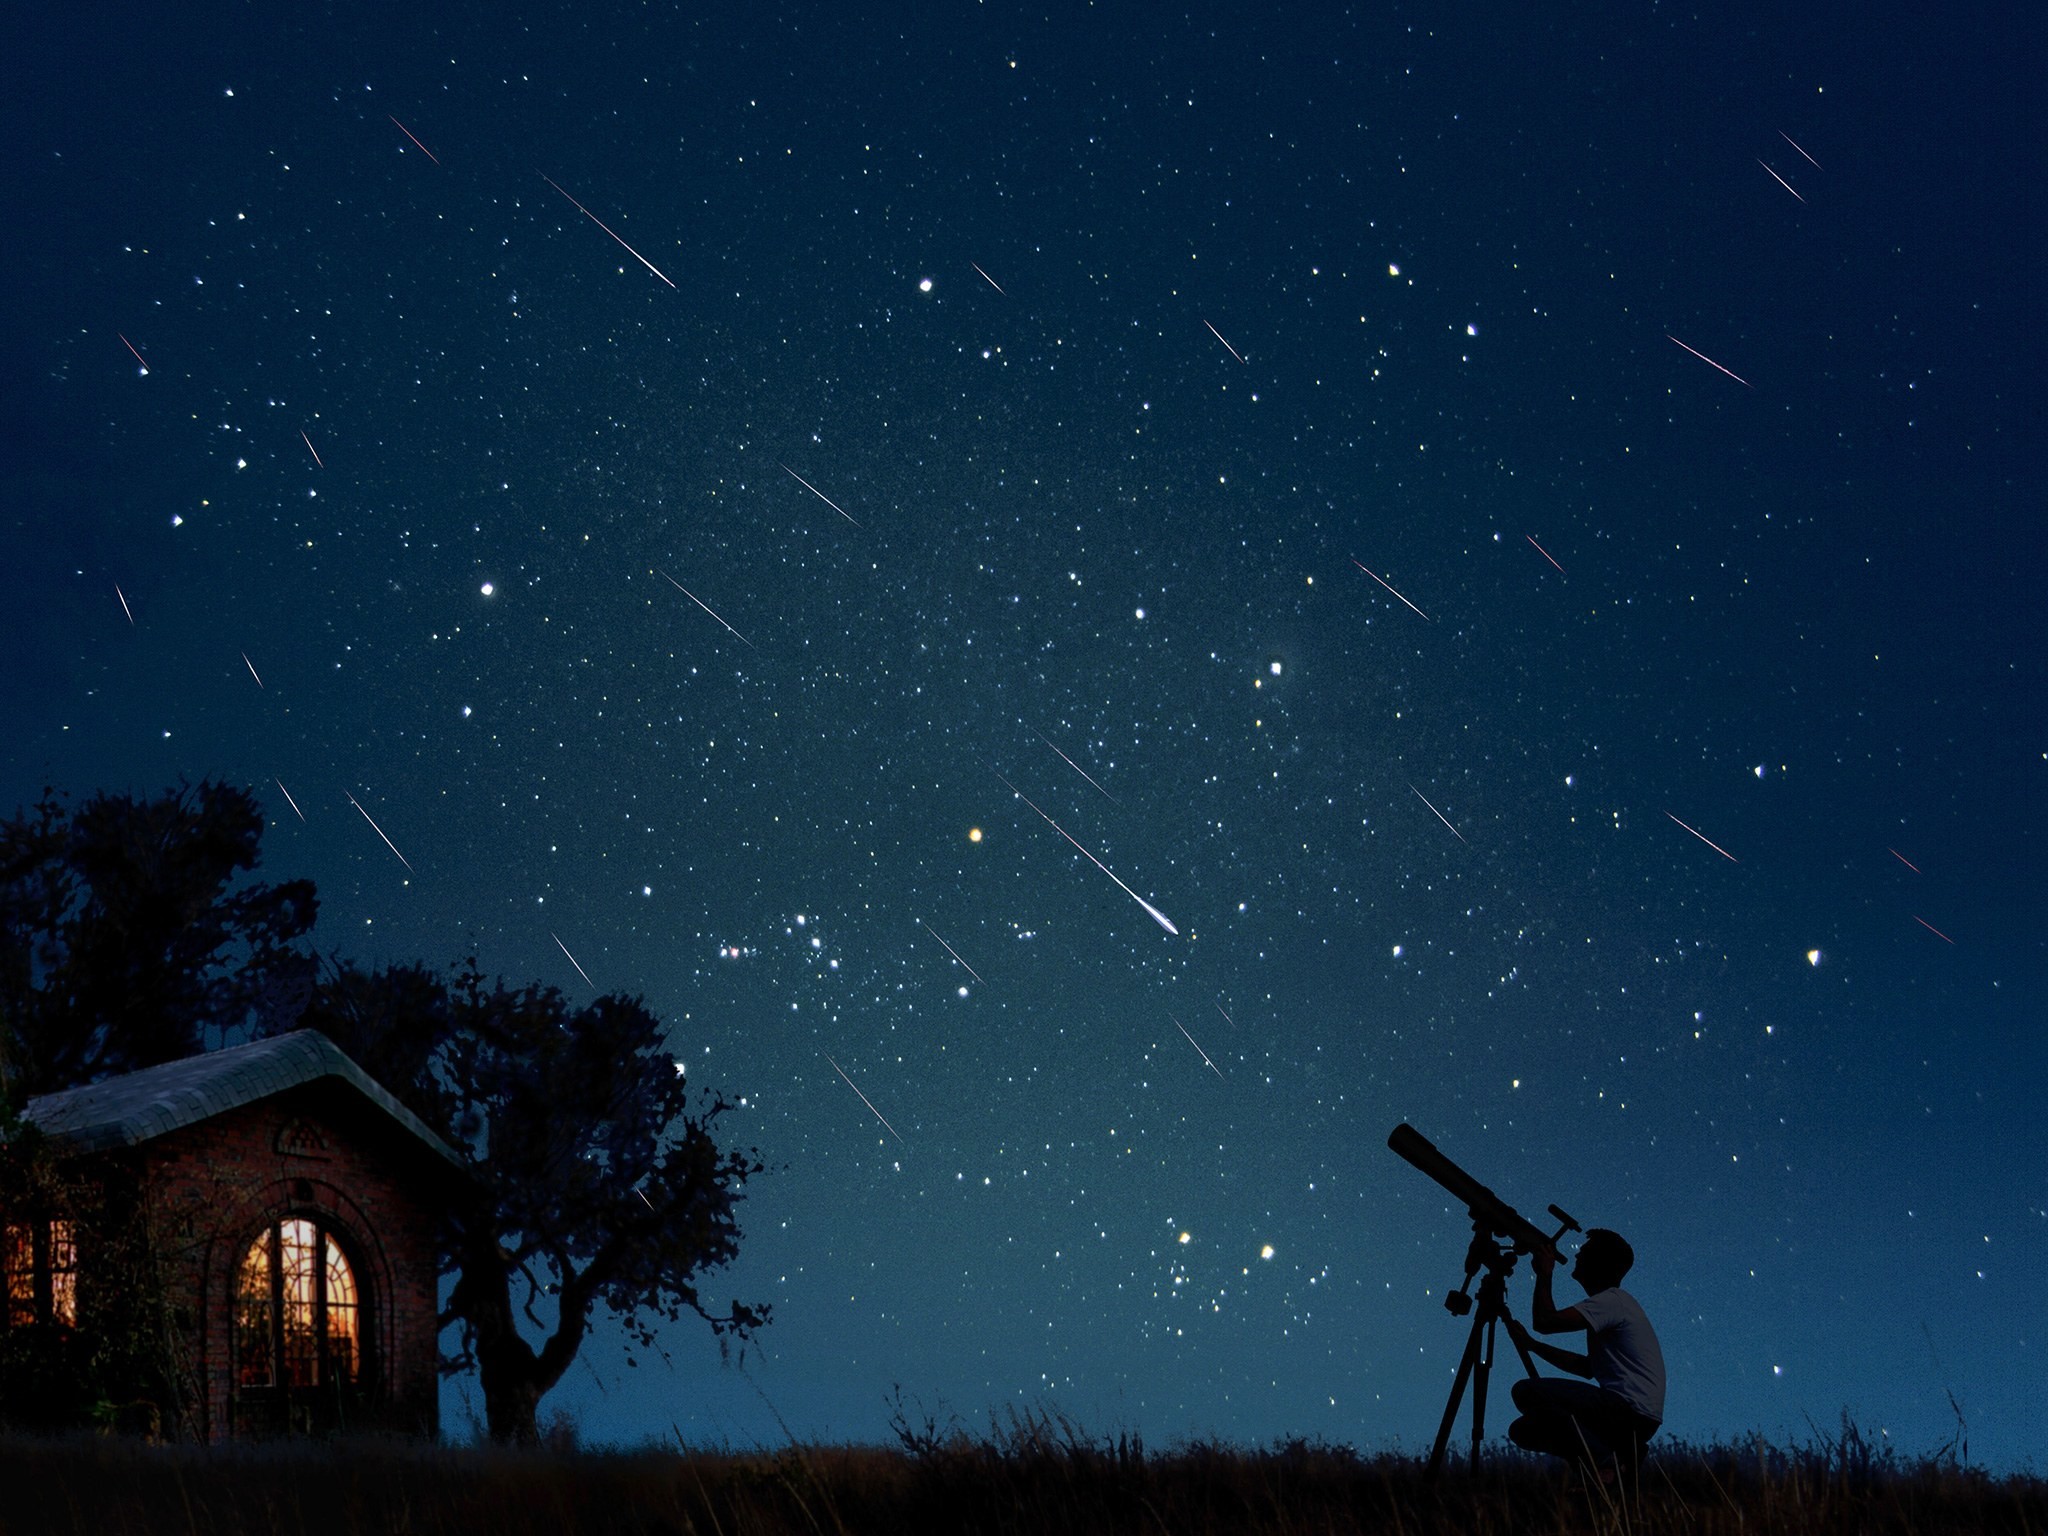 2048x1536 The Leonid Meteor Shower Is Coming to a Town Near You - CondÃ© Nast Traveler